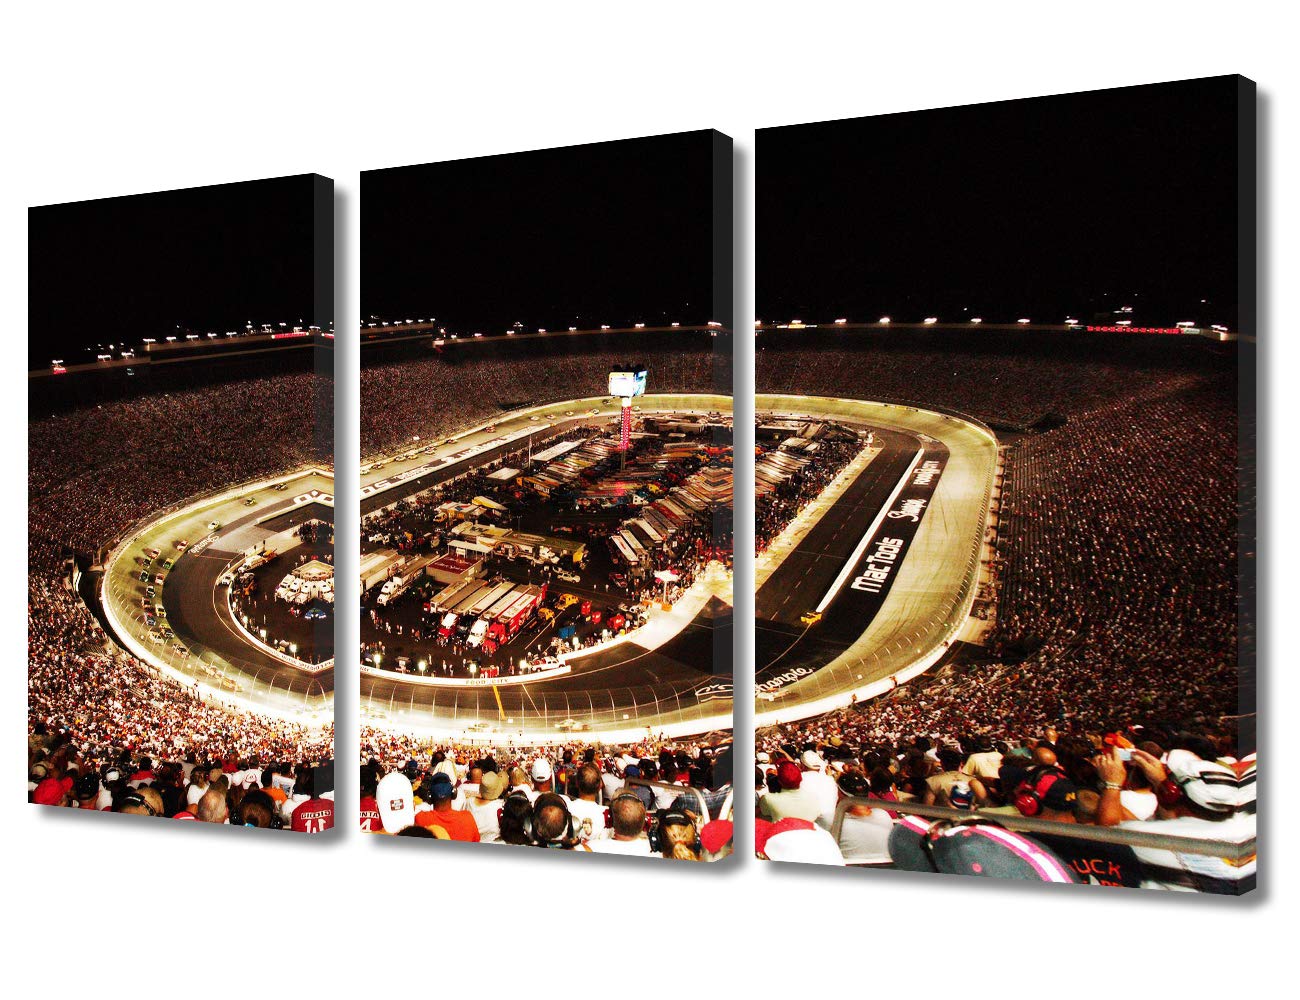 Wall Pictures for Living Room Bristol Night Race Canvas Prints 3 Piece Wall Art Nascar Tracks Picture Sport Painting Artwork Home Decor Giclee Gallery-Wrapped Framed Ready to Hang, 36" Wx24 H